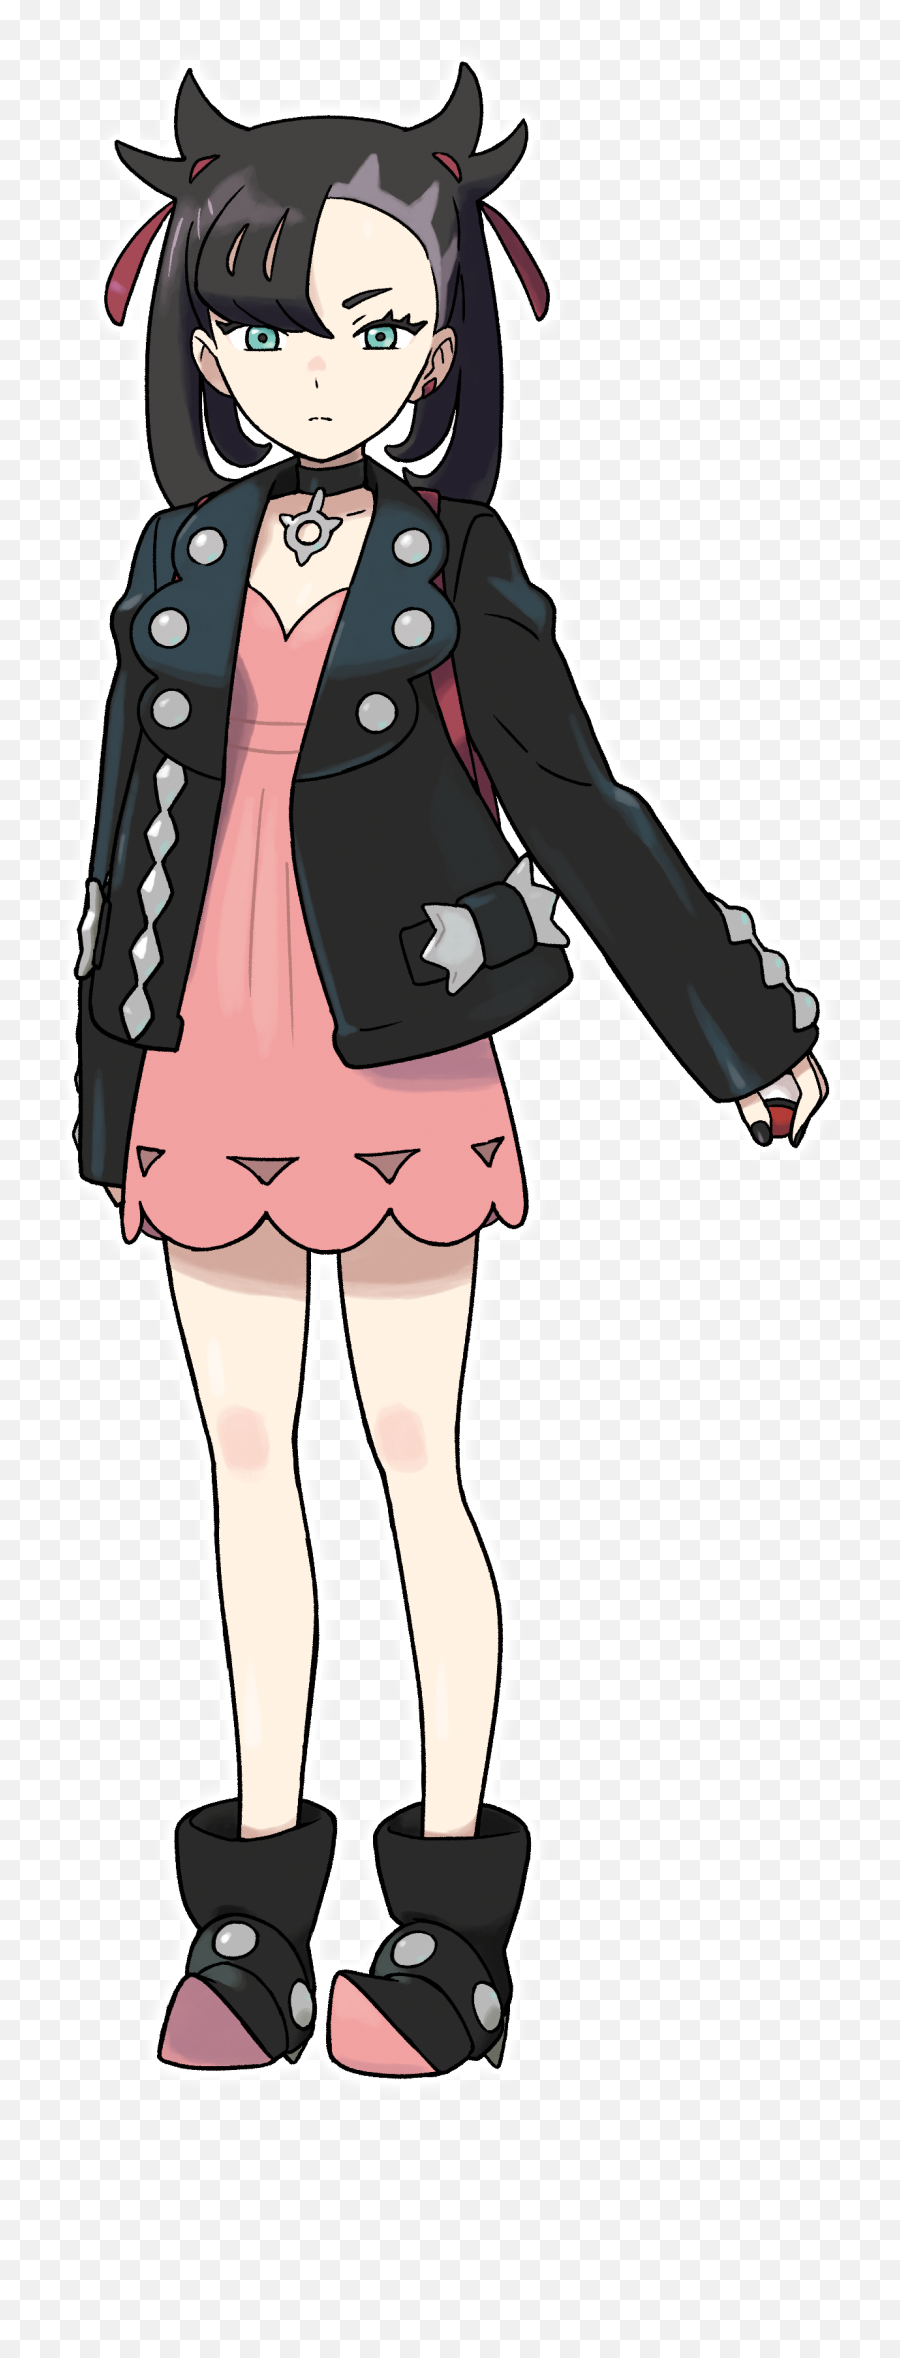 Marnie Render Pokemon Sword And Shieldpng - Renders Aiktry Pokemon Rivals Sword And Shield,Black Shield Png